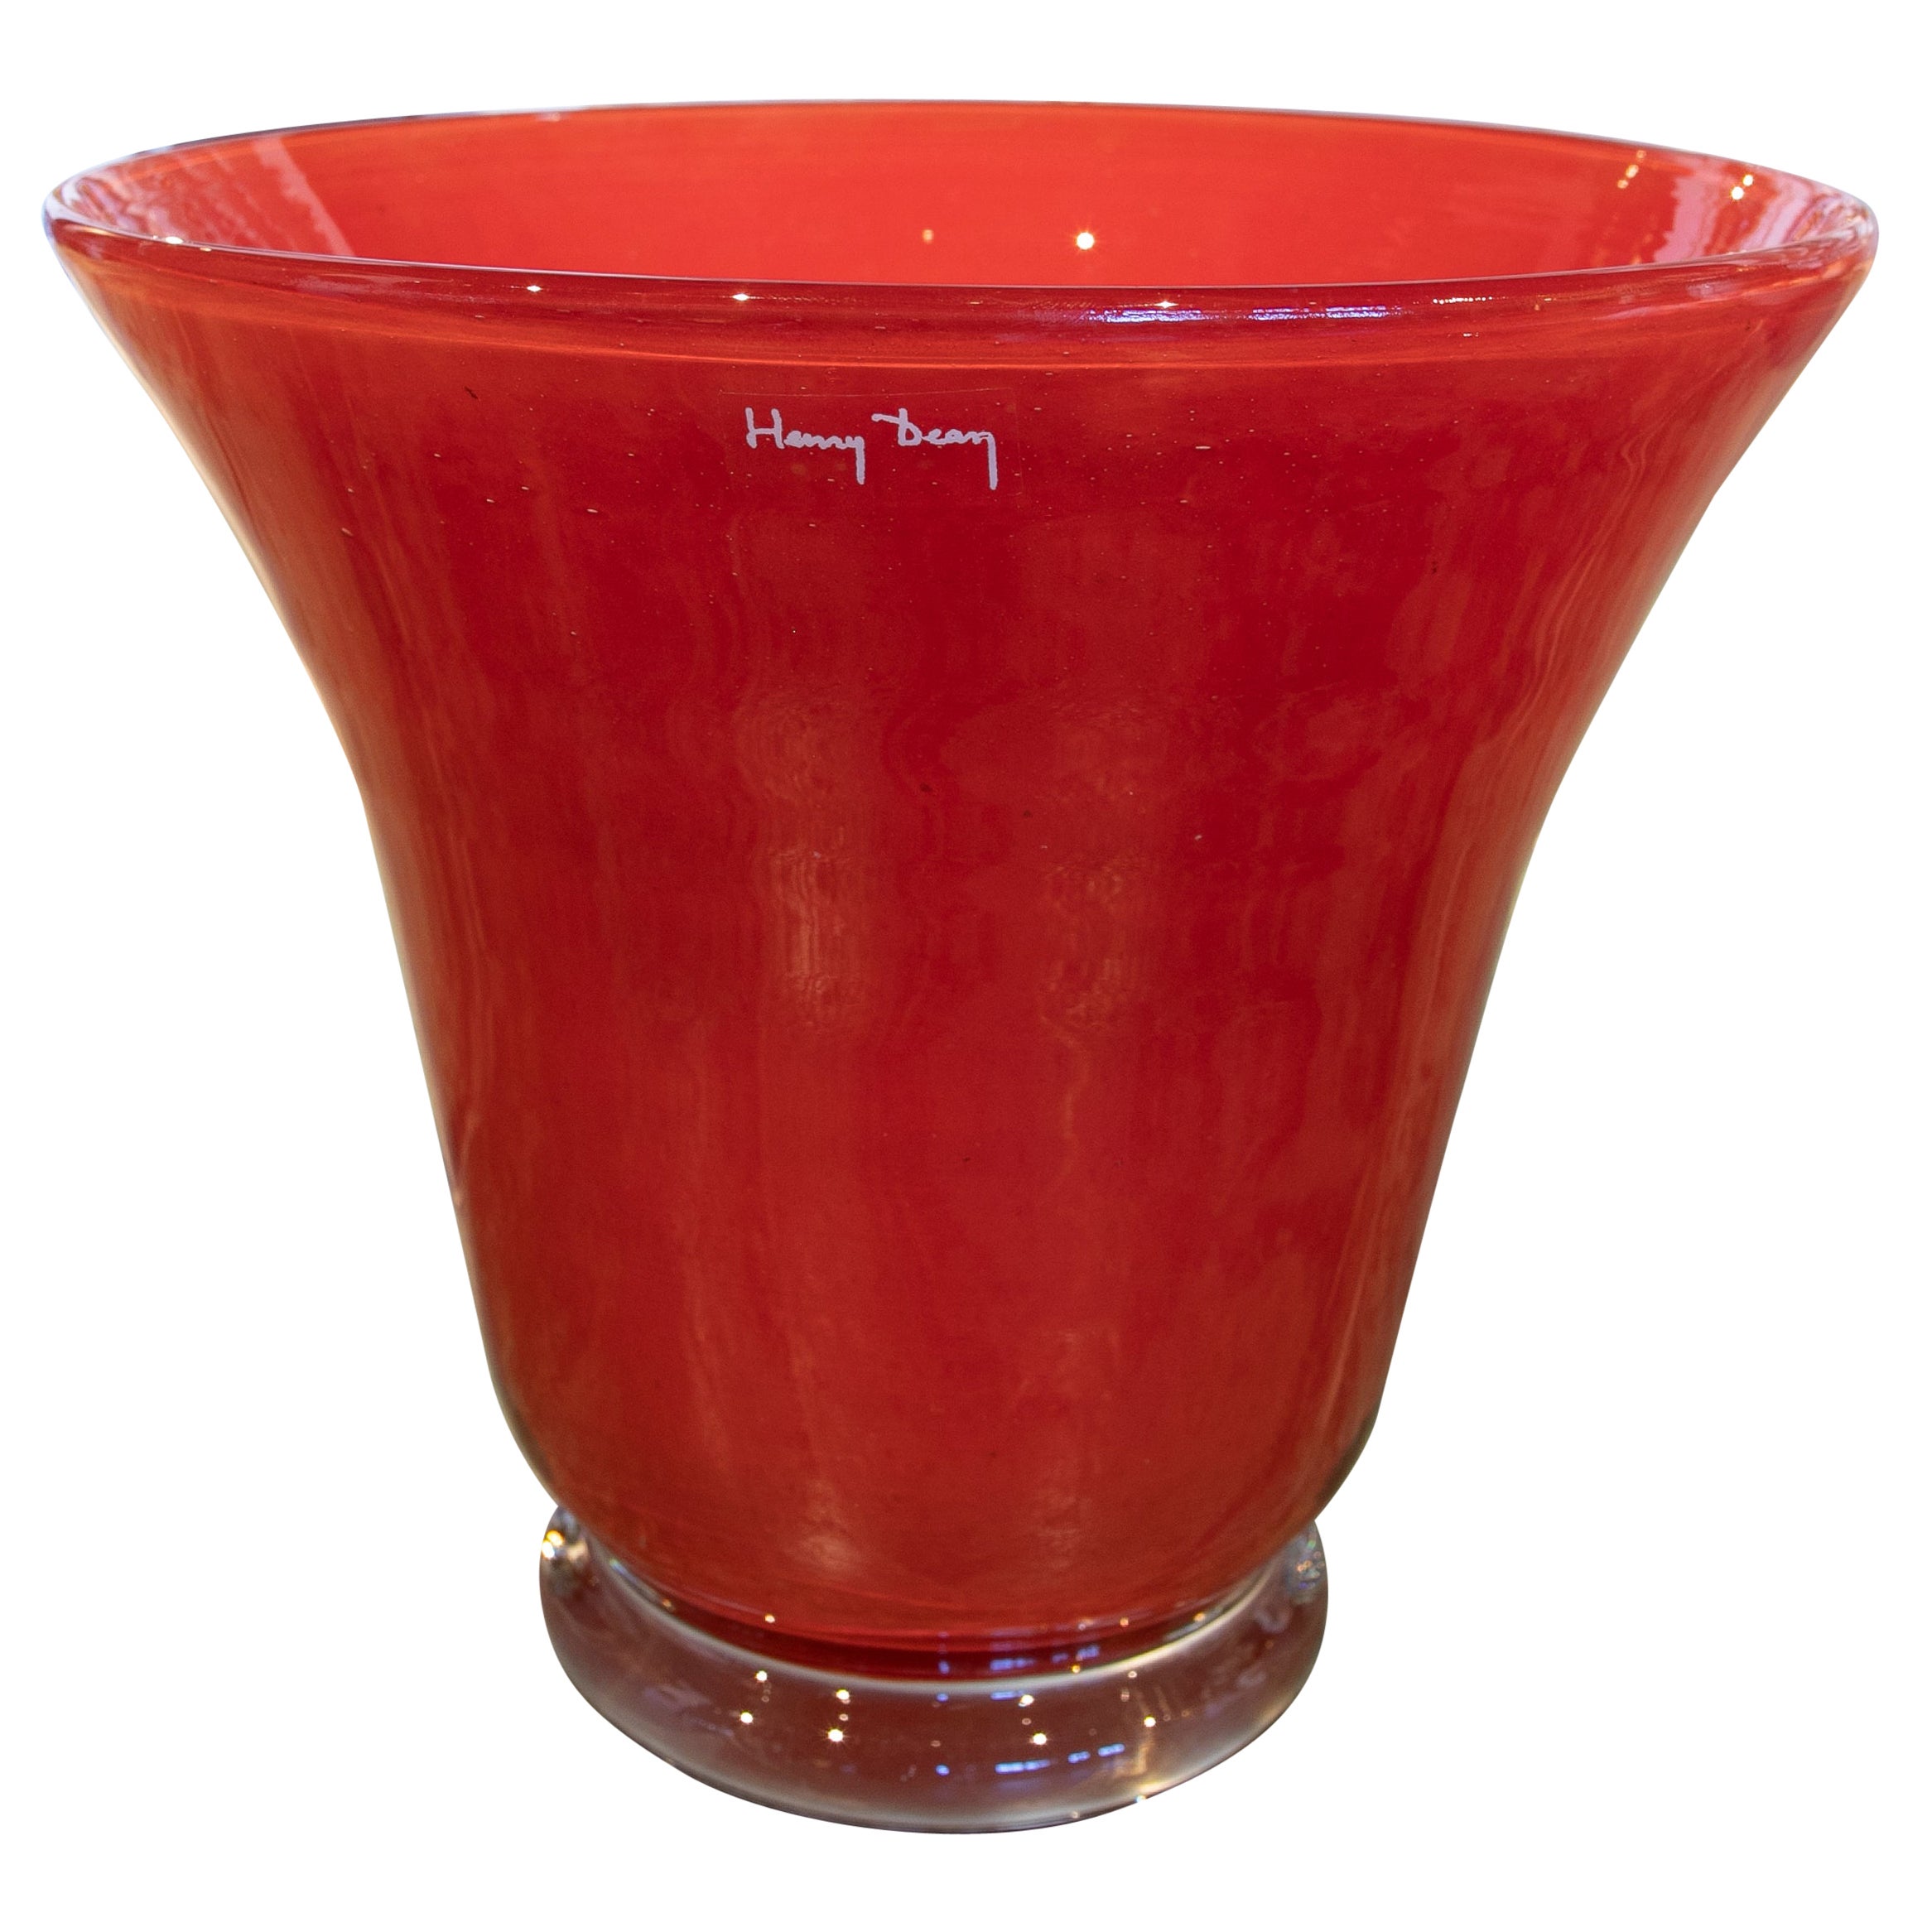 Handmade Red Glass Vase Signed by Henry Dean